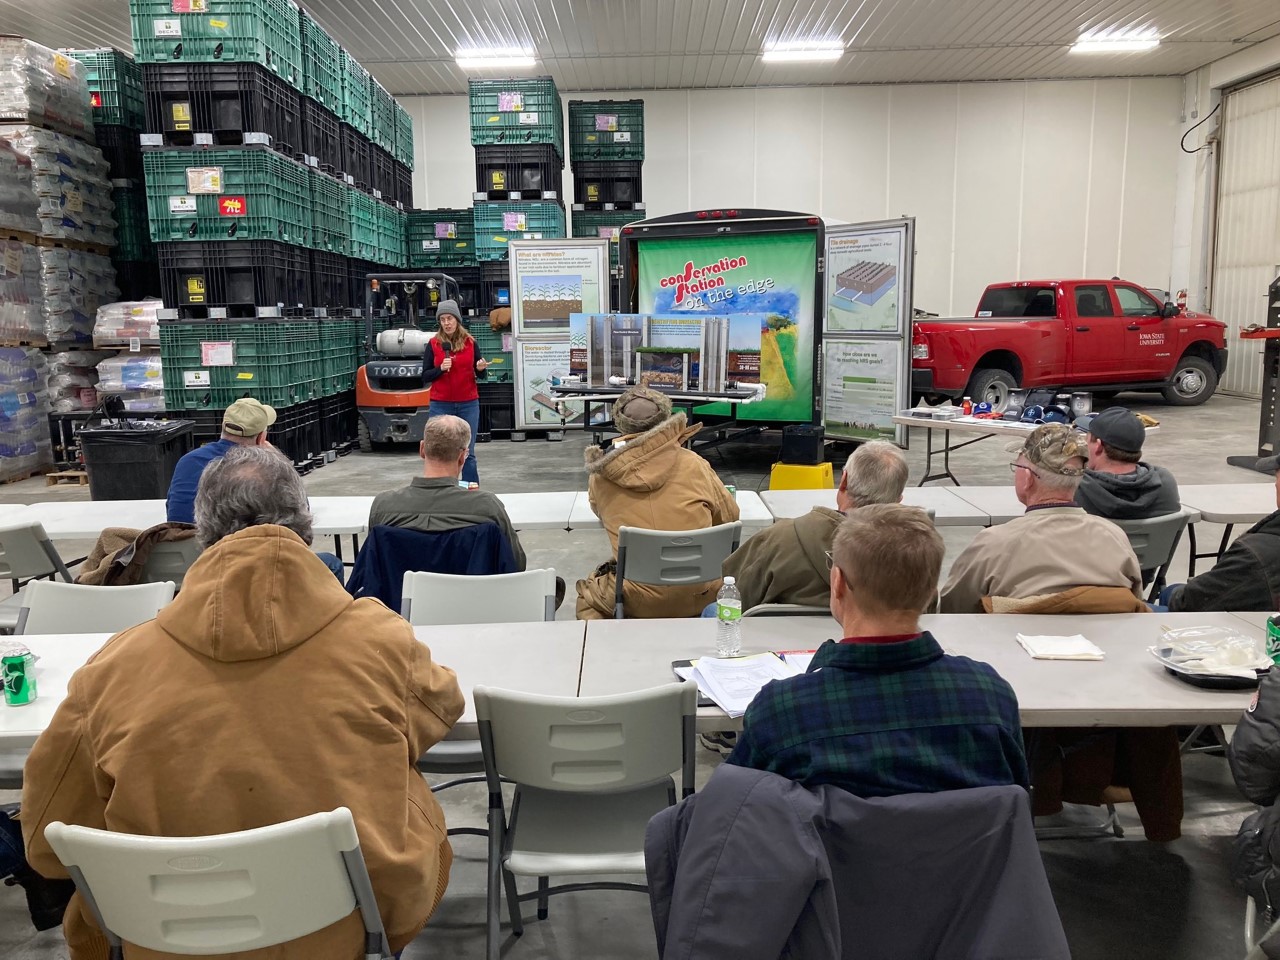 Conservation agronomist gives presentation to farmers sitting at tables